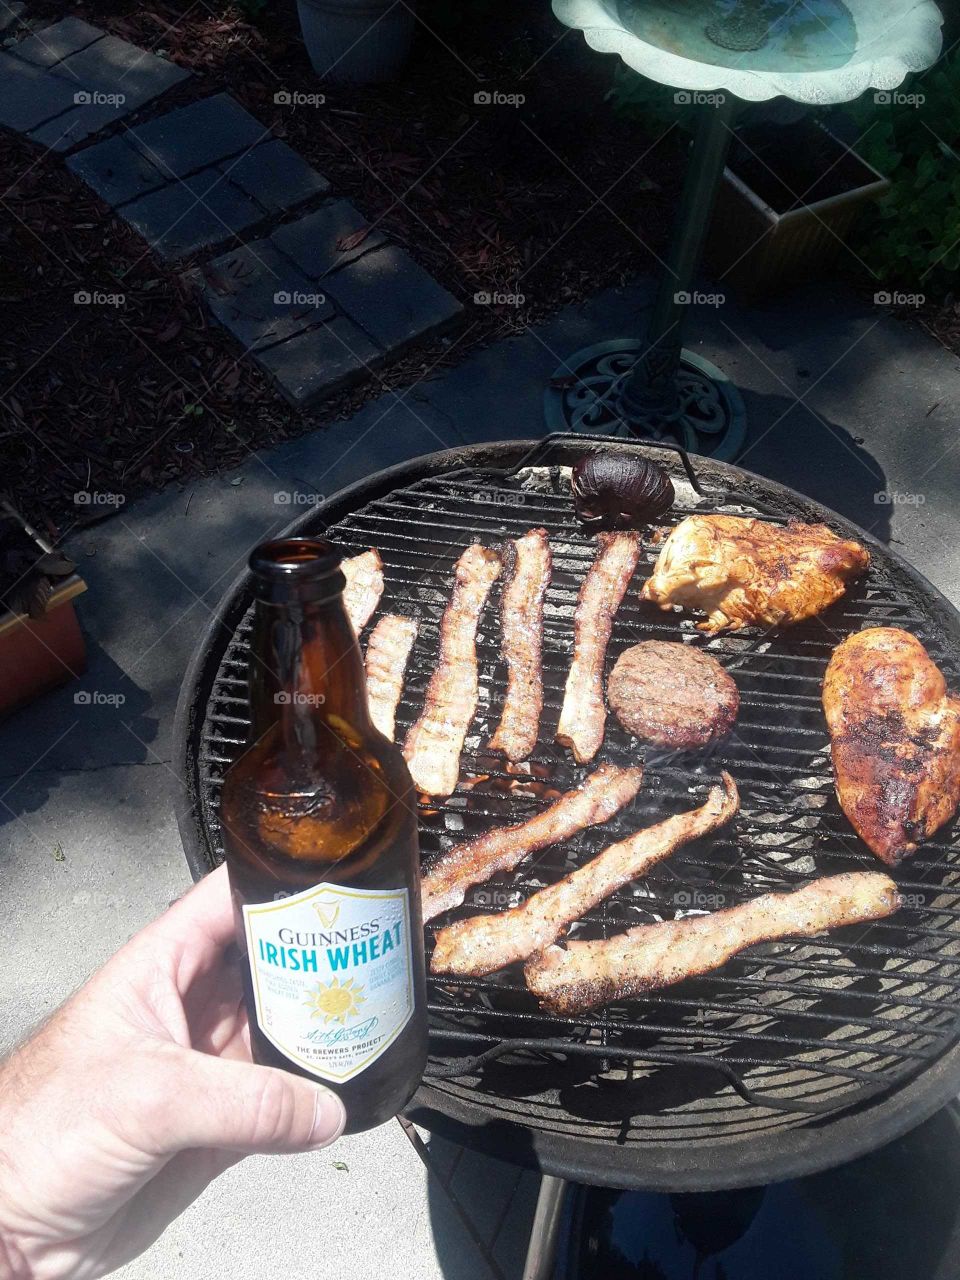 Cold beer and grilling